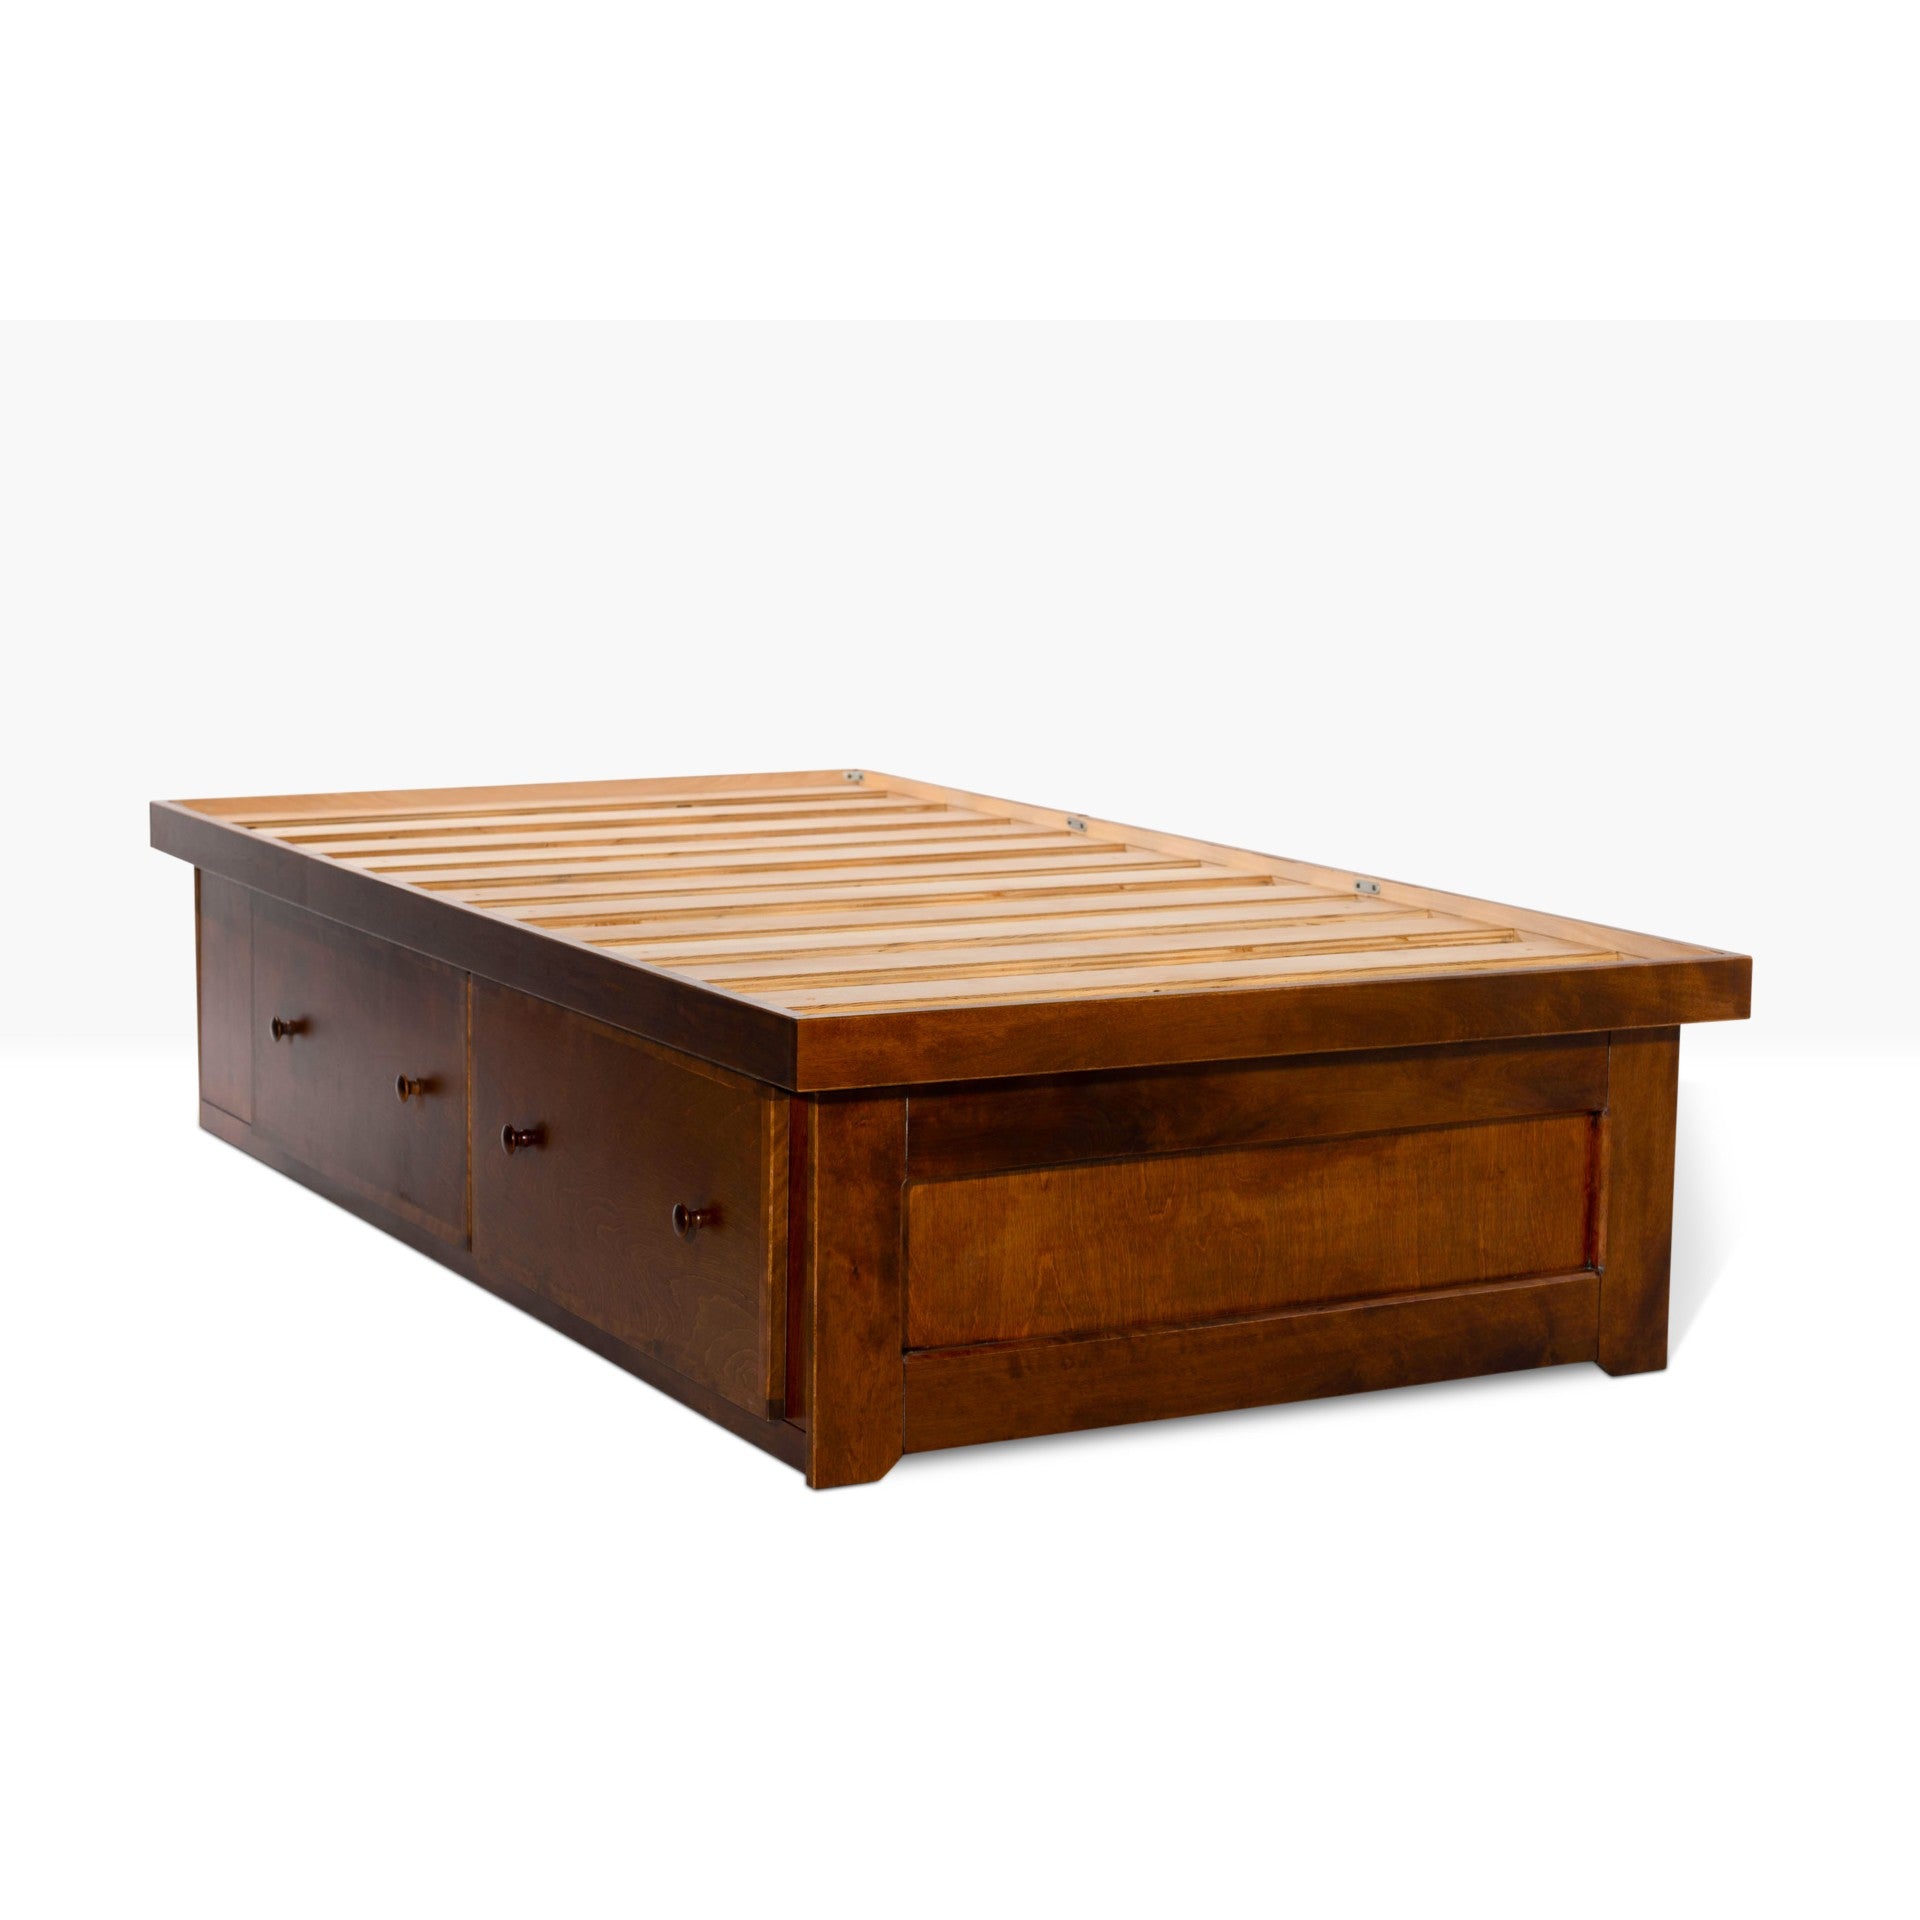 Berkshire Low Storage Bed with four drawers, features two drawers on either side. Shown in Orange Walnut finish.